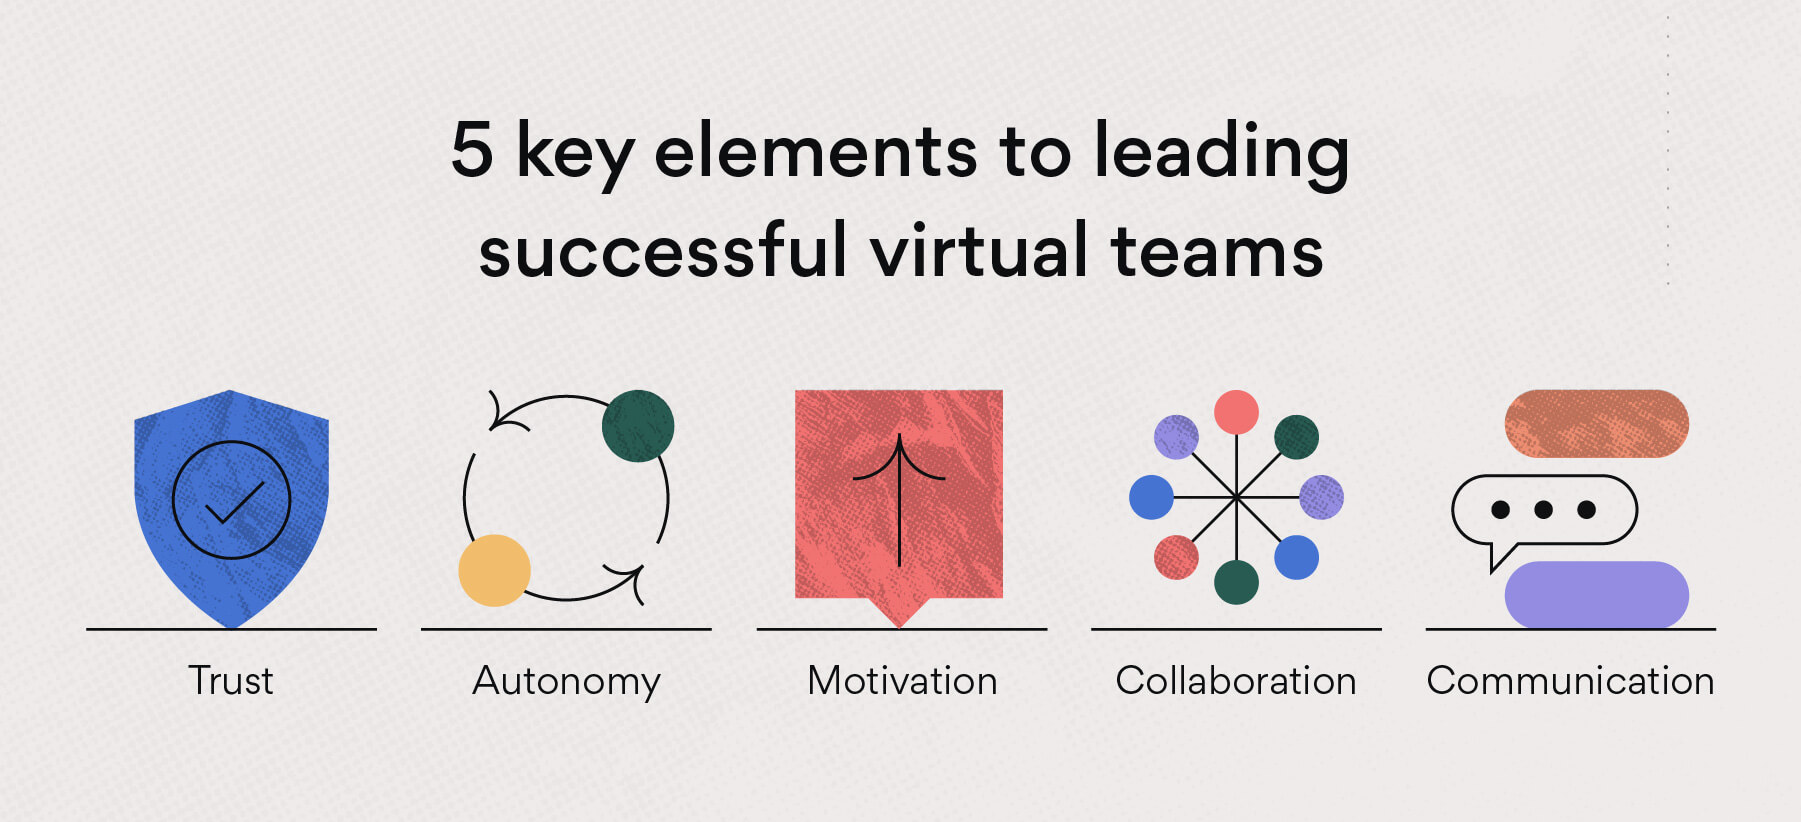 How to manage virtual teams